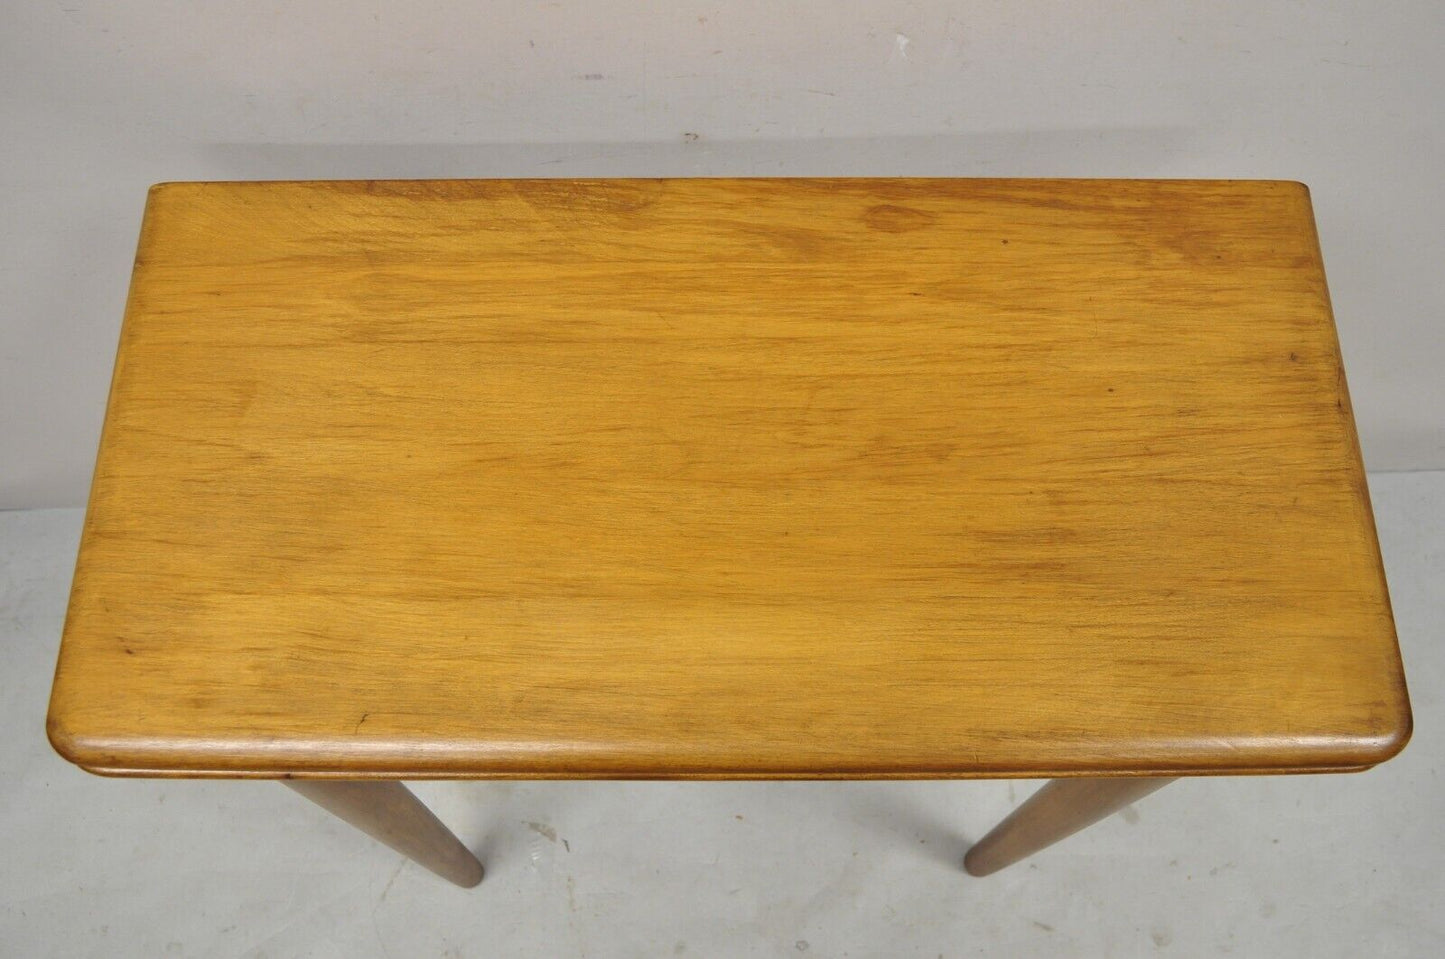 Vintage Mid Century Maple Wood Expanding Folding Game Table